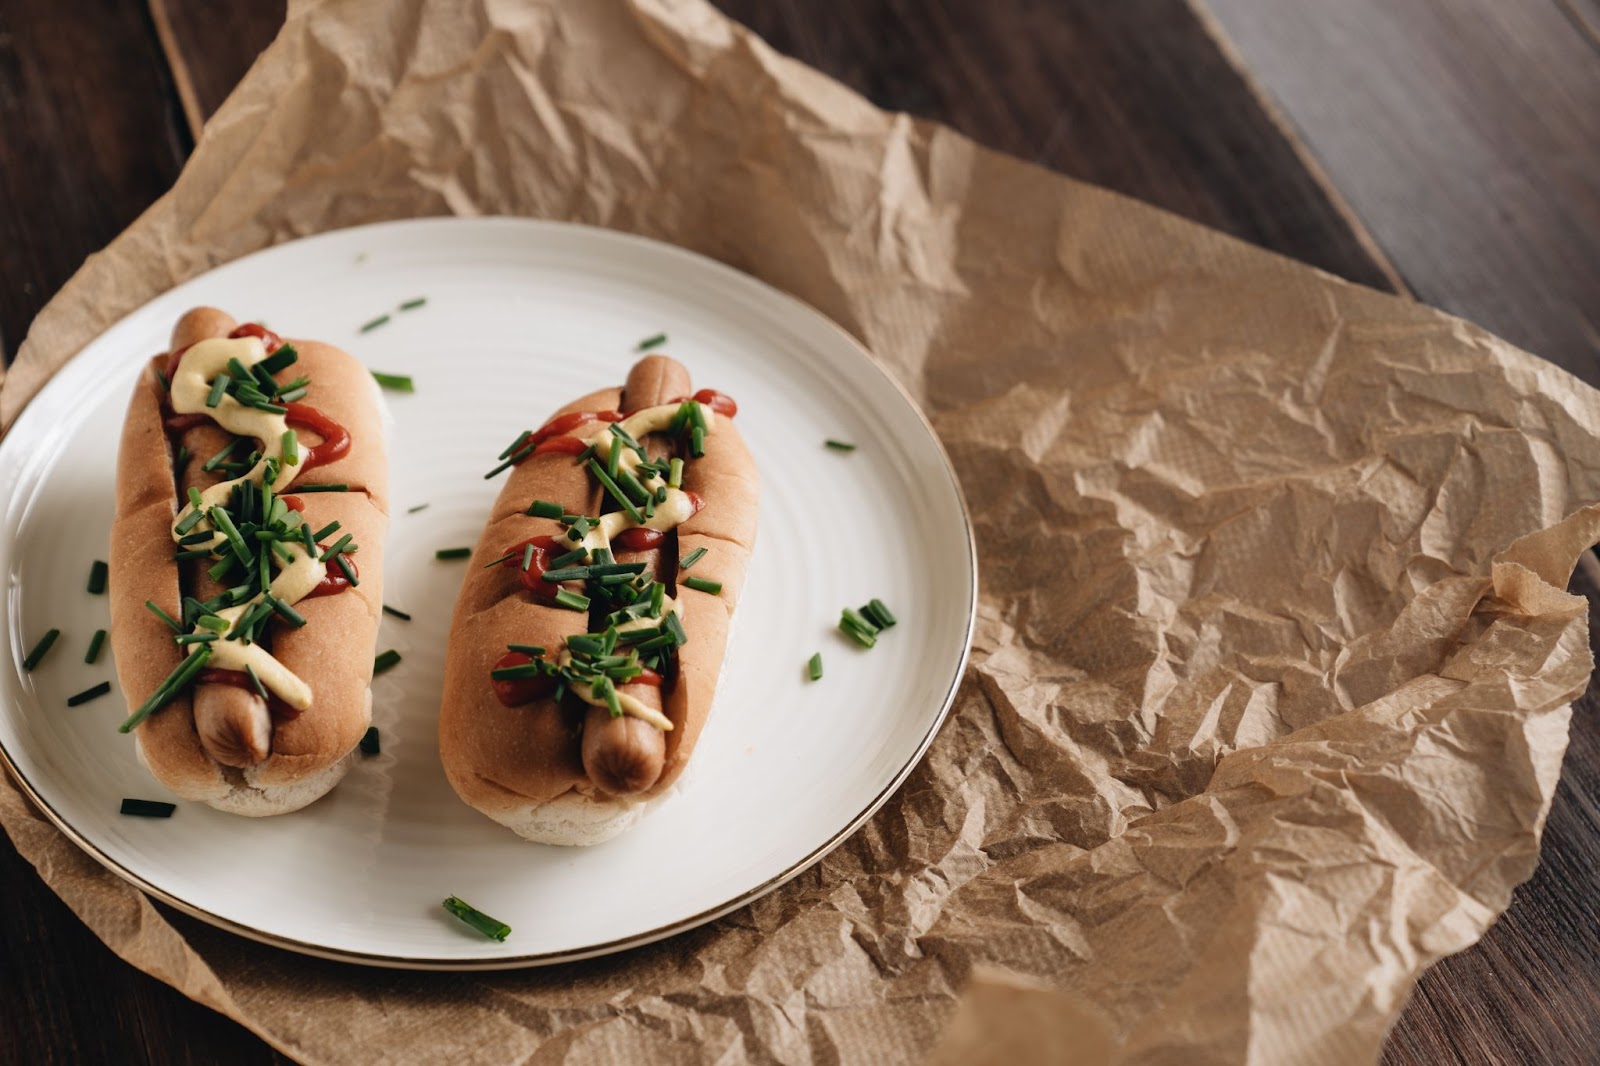 Brands to Use for Hot Dog Grilling